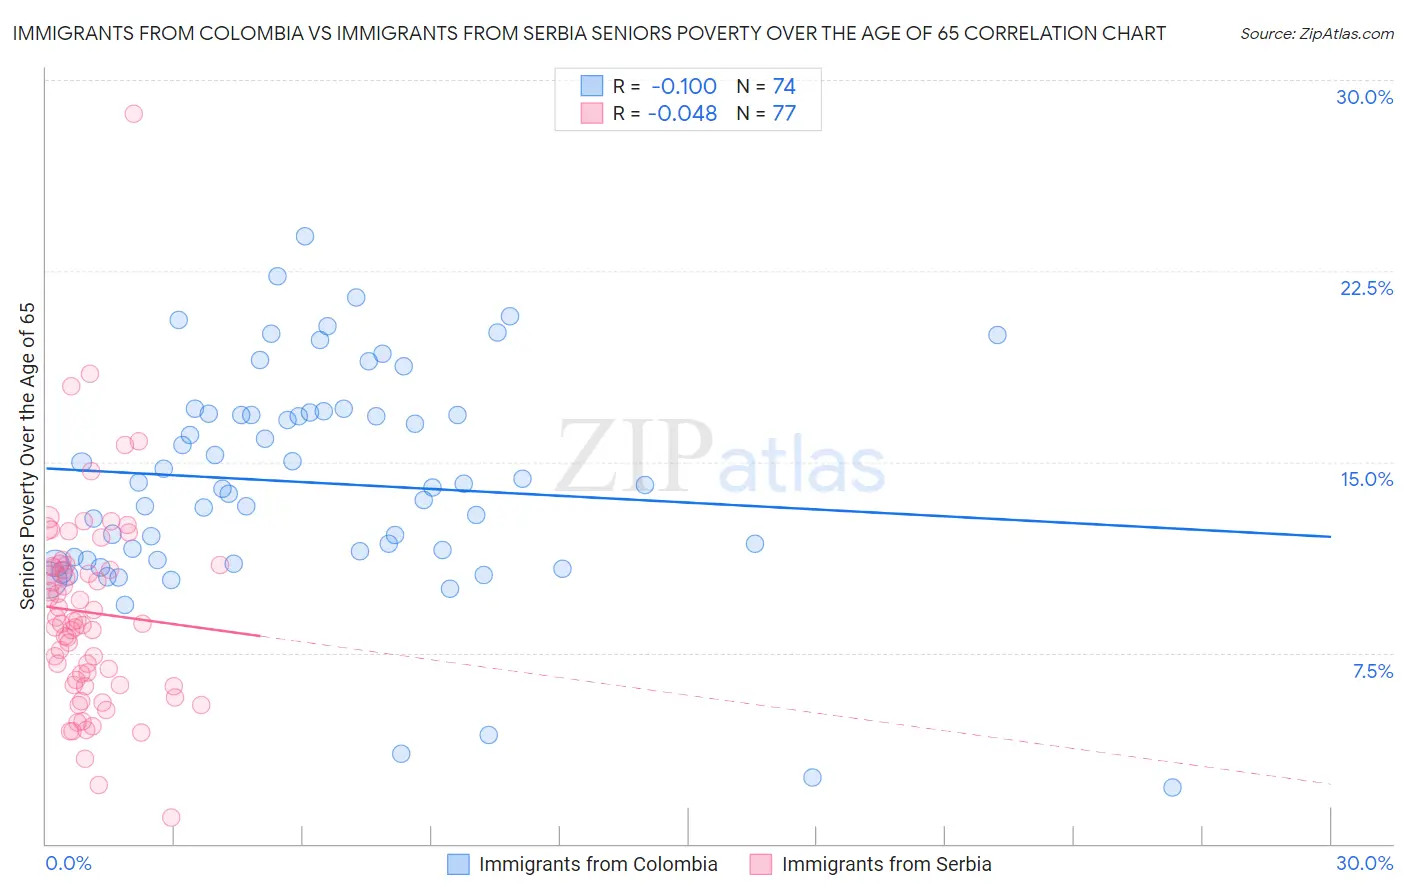 Immigrants from Colombia vs Immigrants from Serbia Seniors Poverty Over the Age of 65